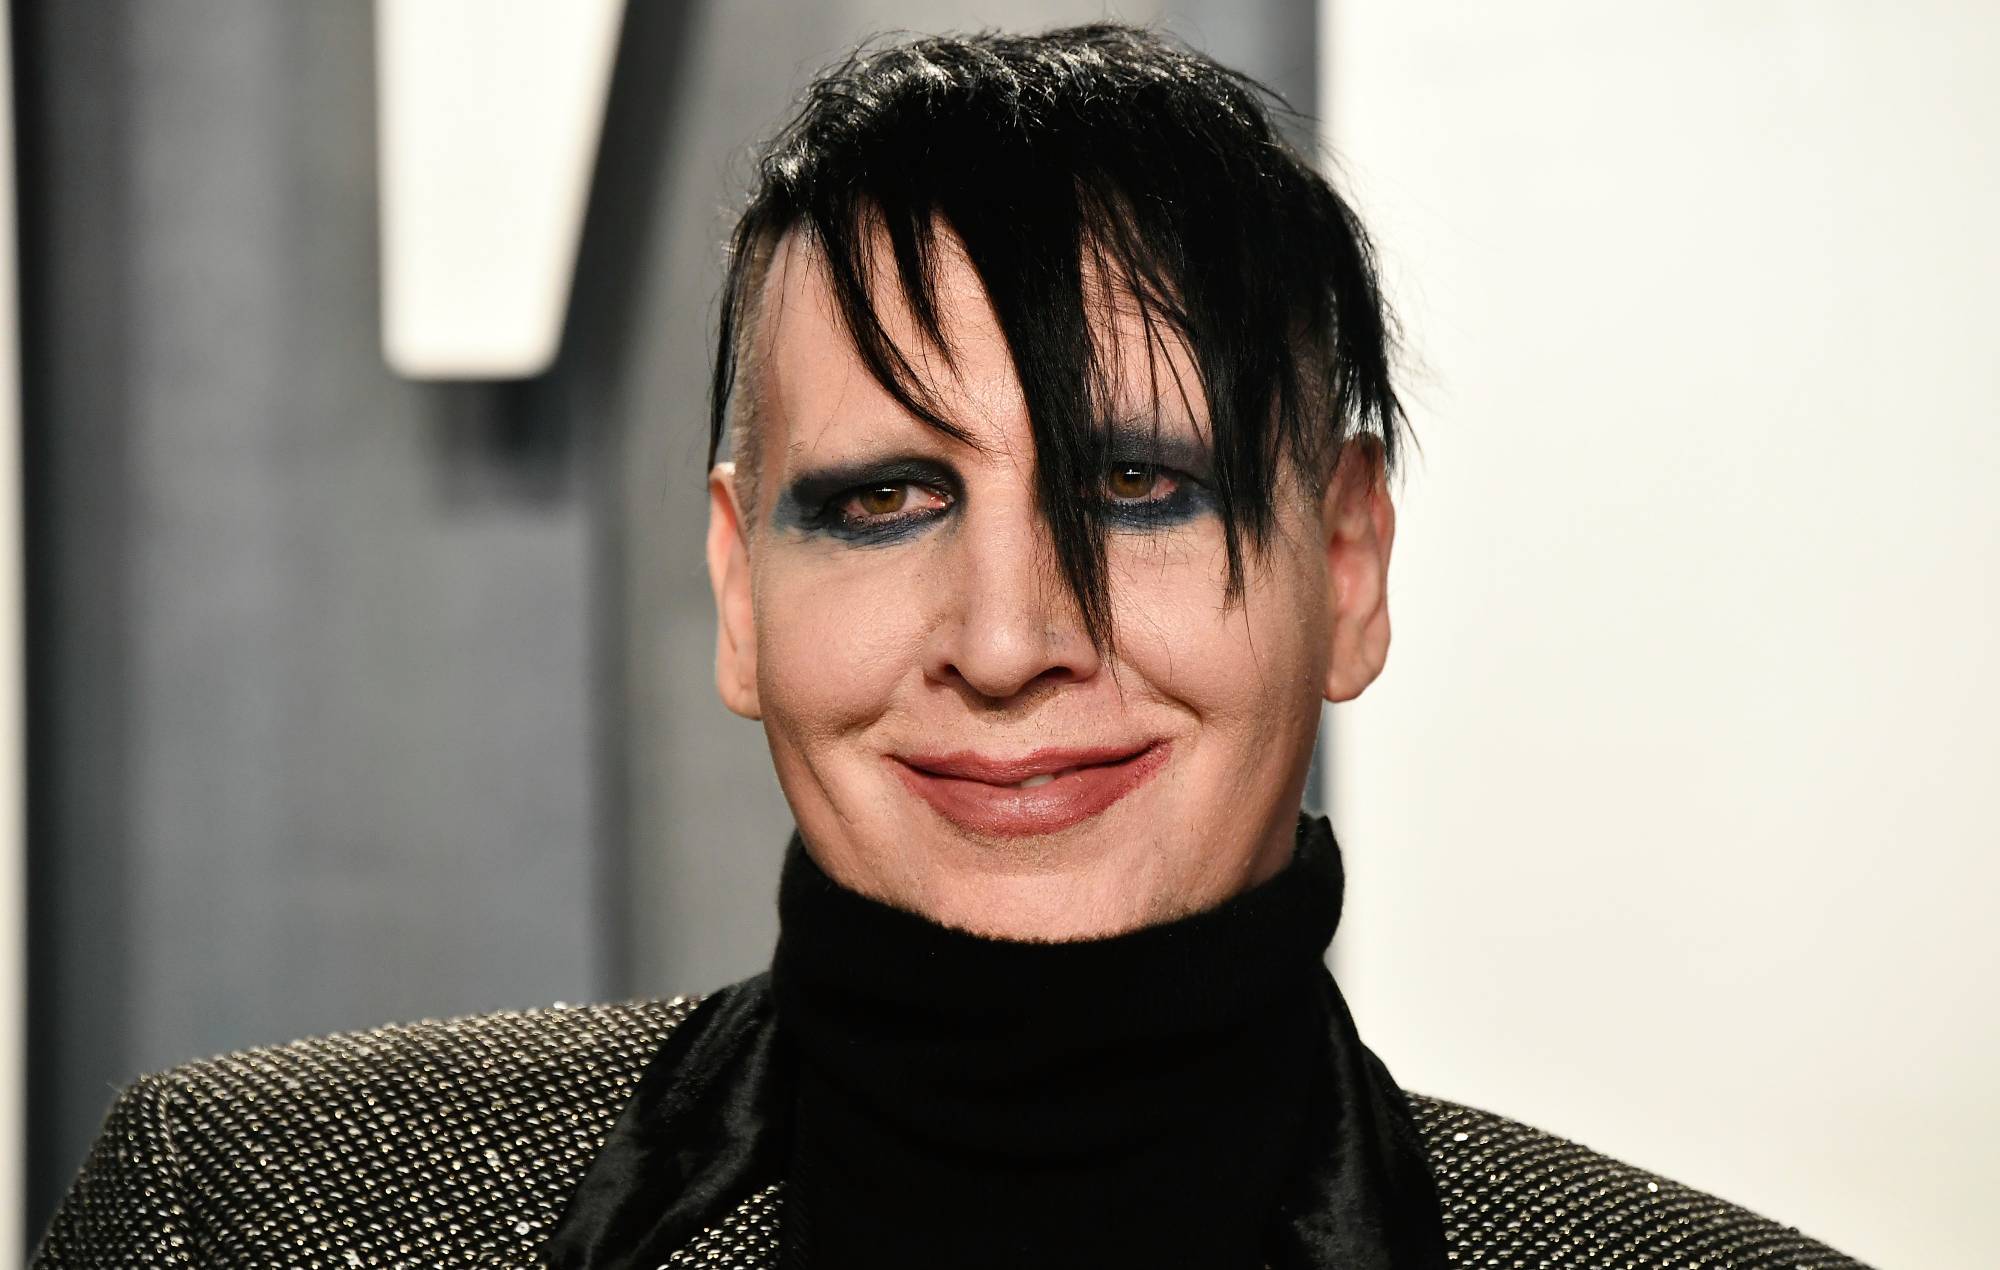 Marilyn Manson plays first live show since sexual abuse allegations came to light